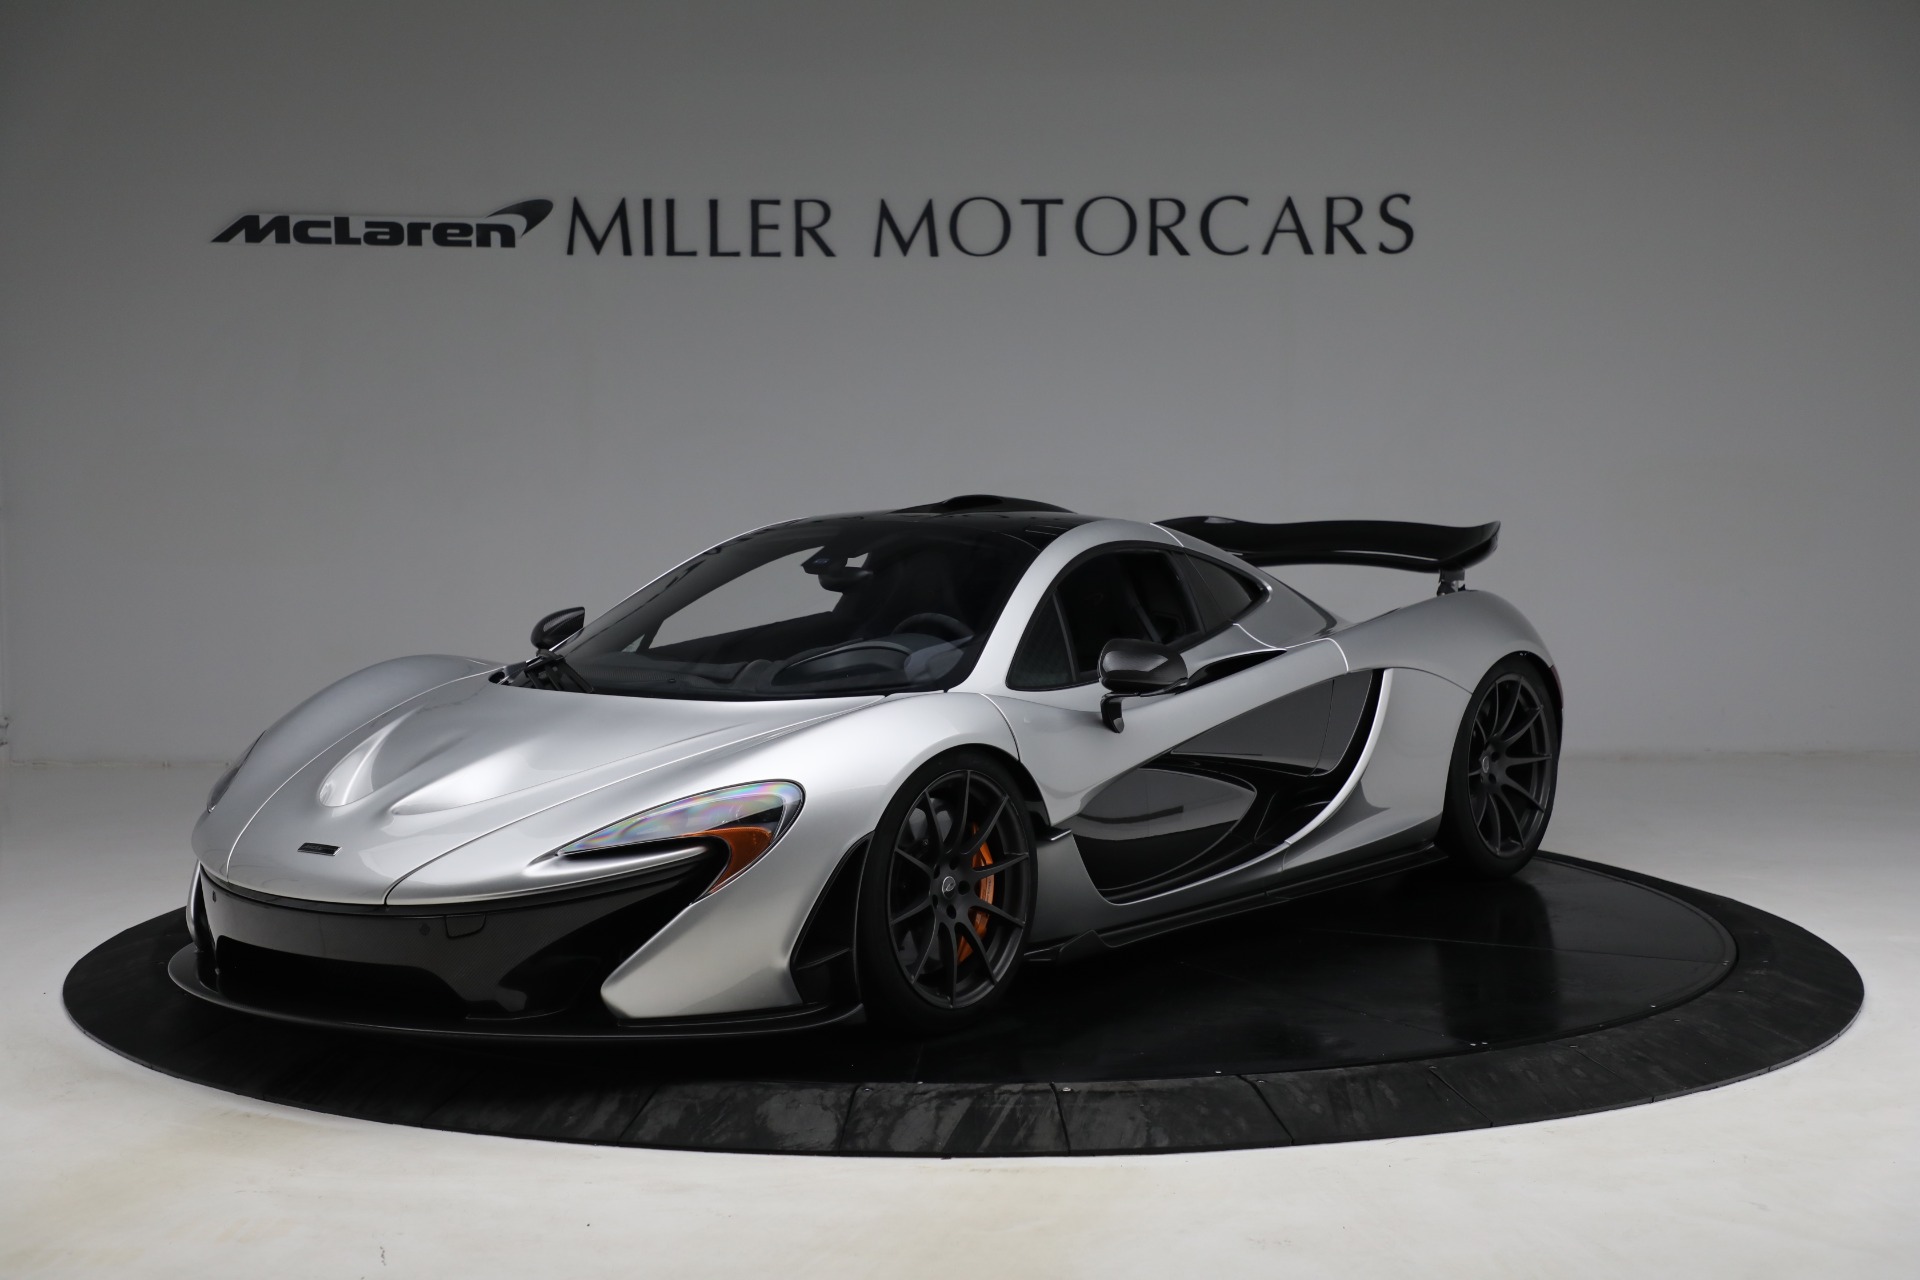 Used 2015 McLaren P1 for sale $1,795,000 at Bentley Greenwich in Greenwich CT 06830 1